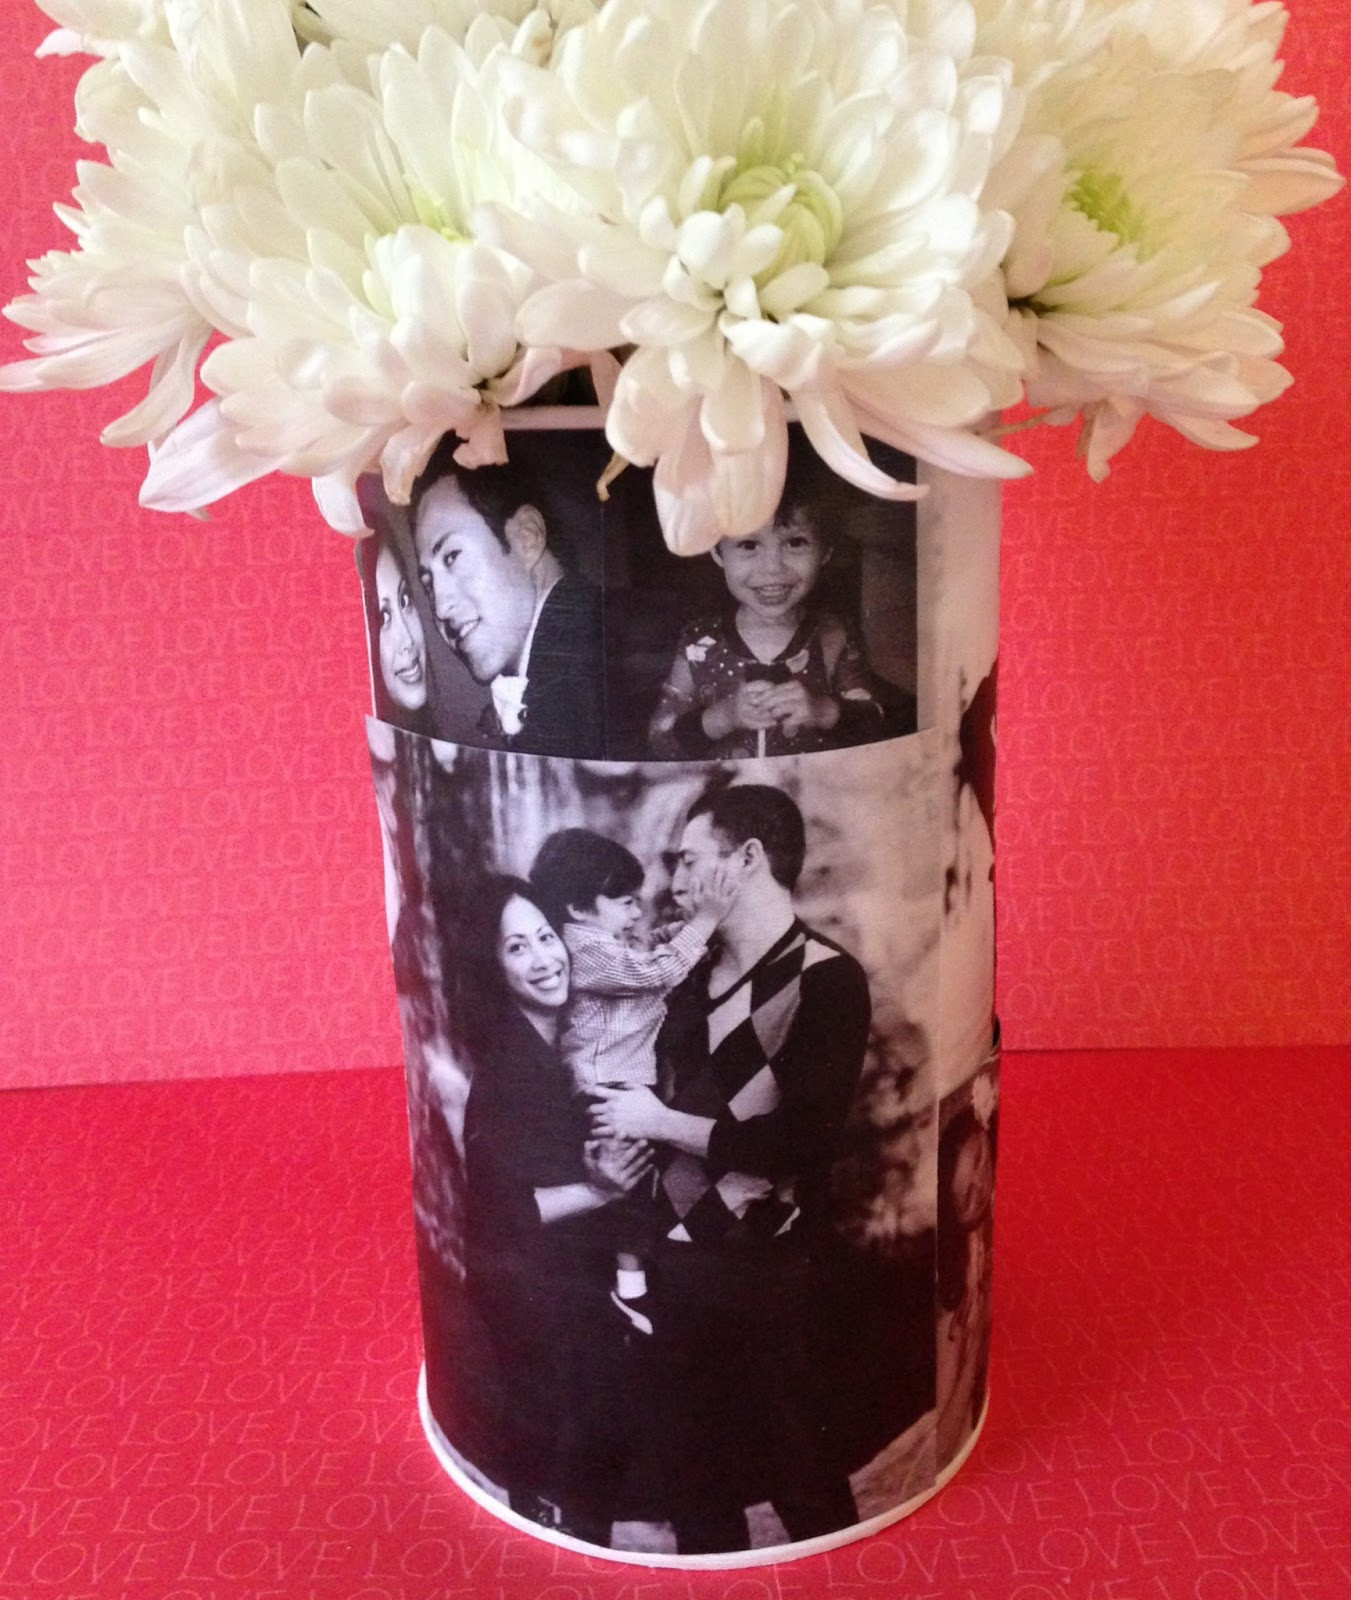 15 Nice Modge Podge Pictures On Glass Vase 2022 free download modge podge pictures on glass vase of decoupage photo vase happy mess moments intended for then using a foam brush apply a layer of mod podge on the back of each photo and strategically plac